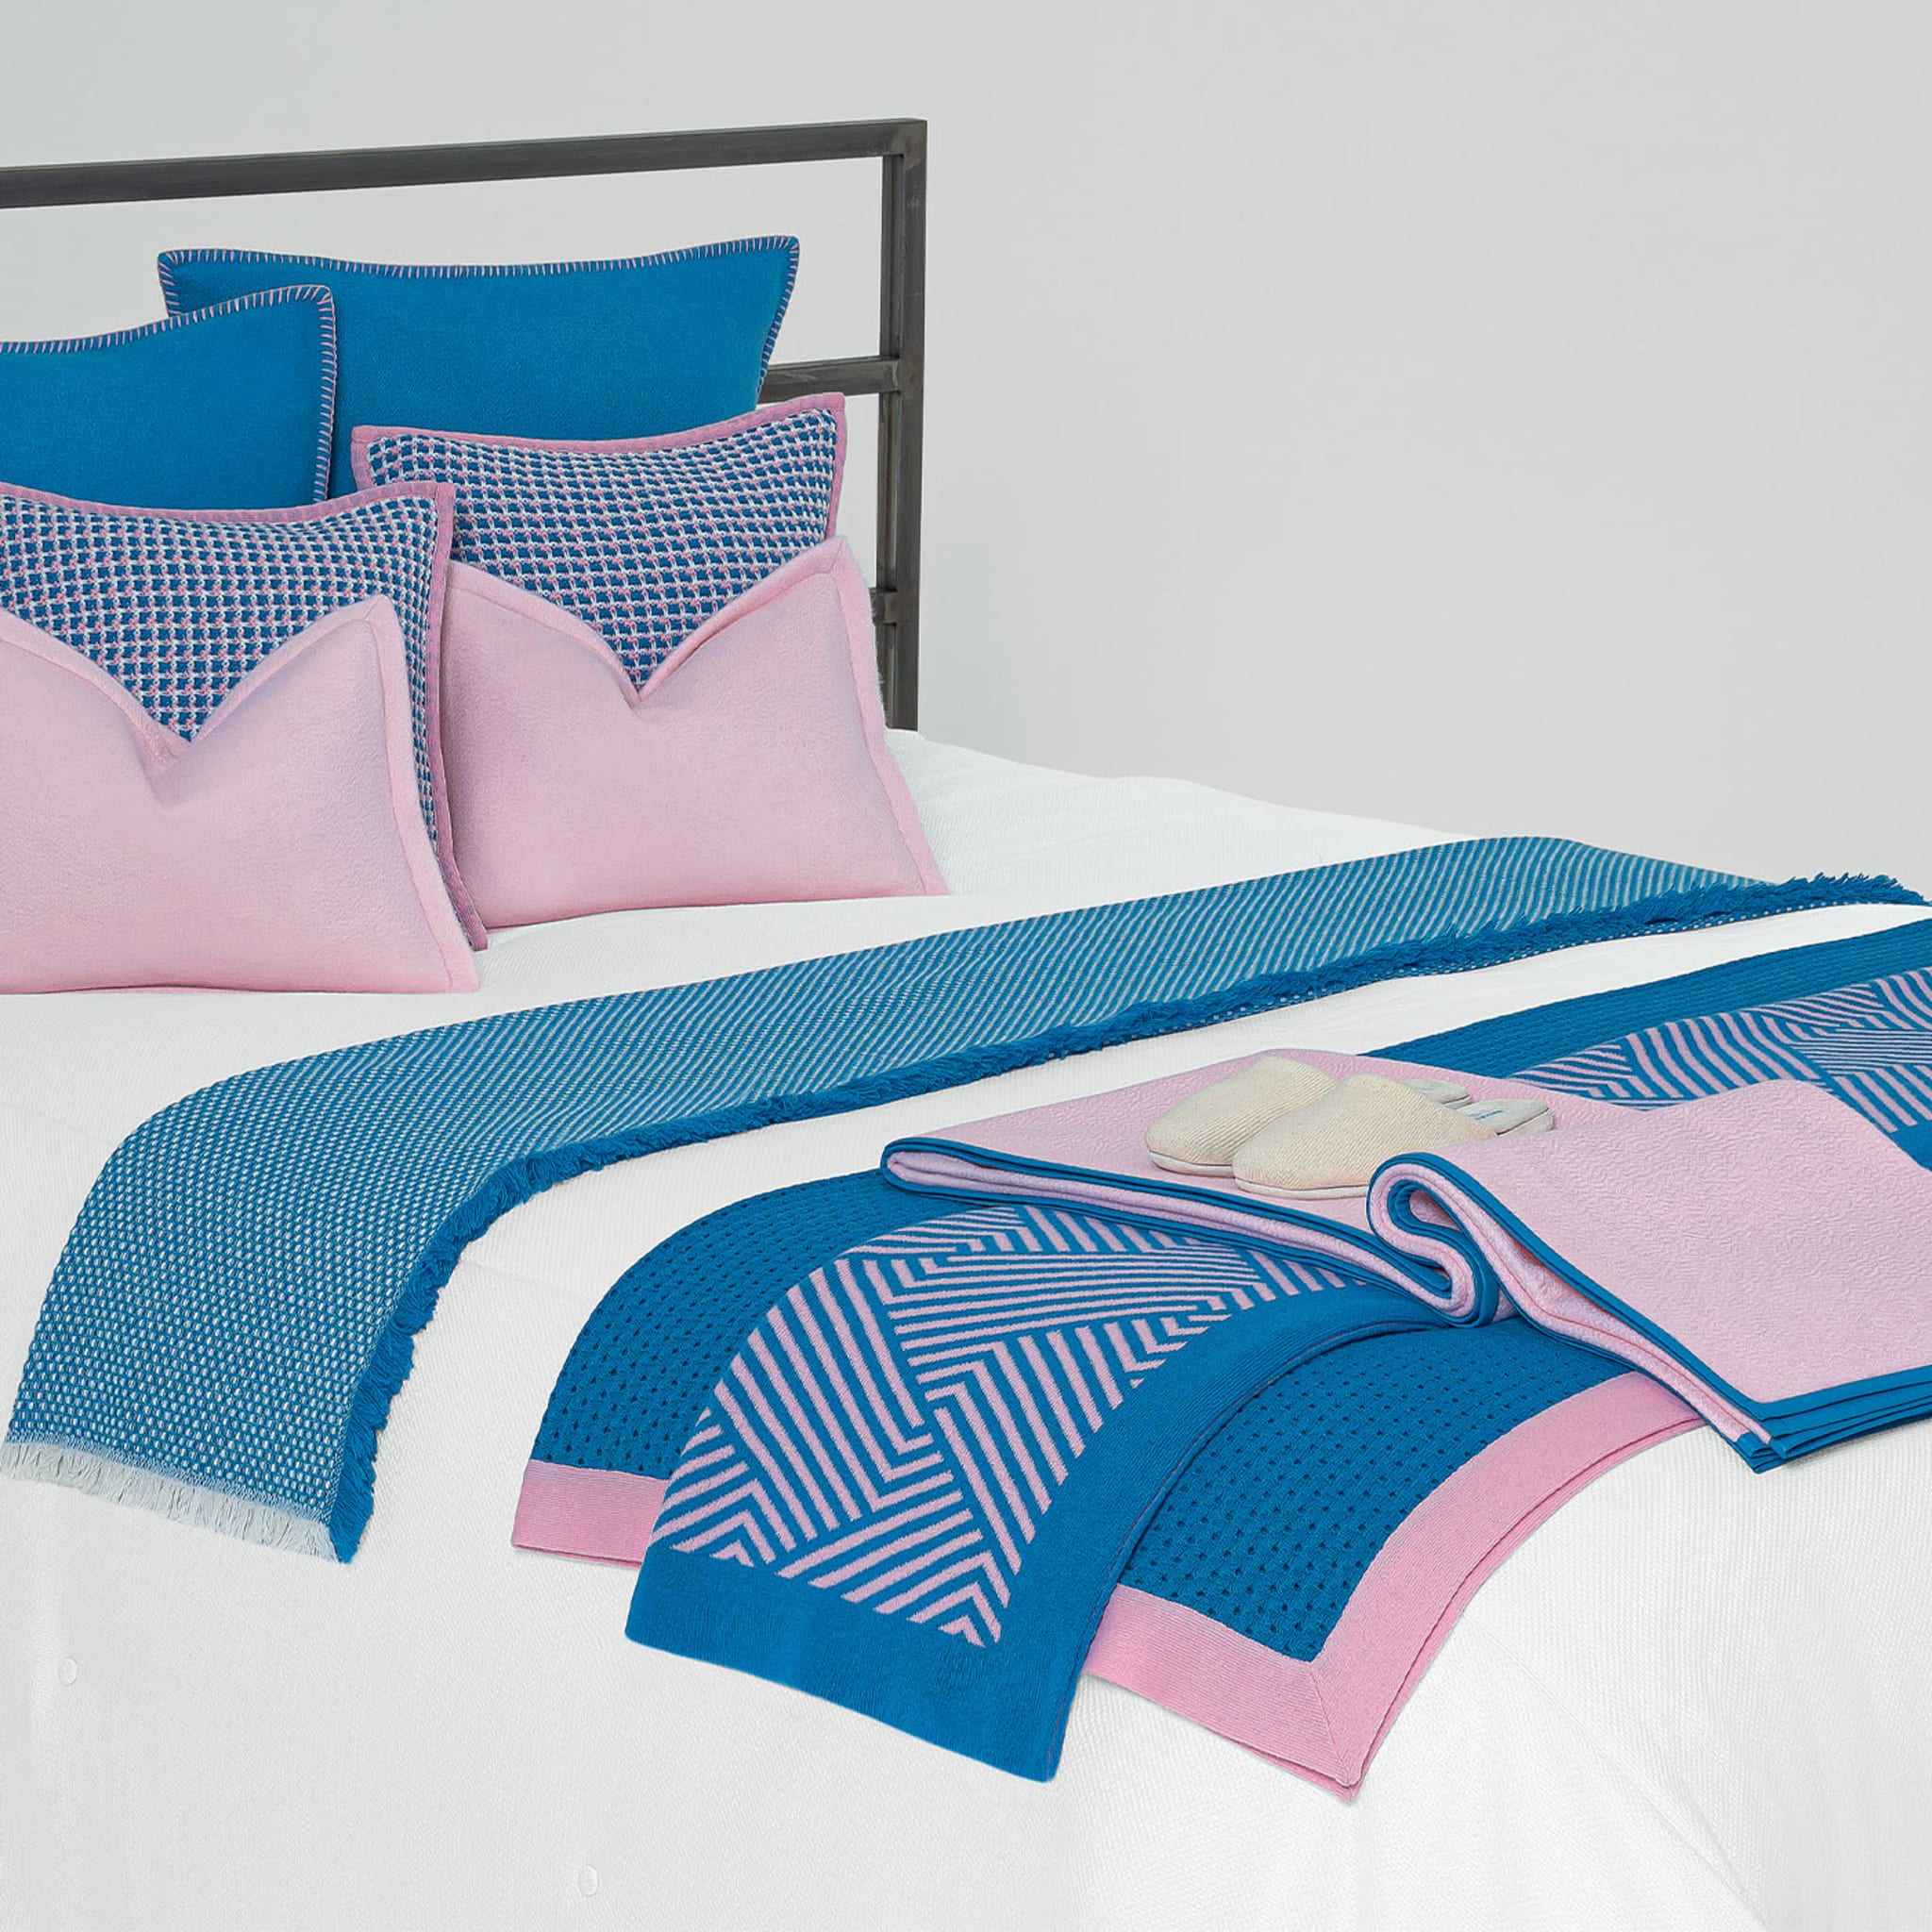 Biella Blue Leather and Pink Blanket - Alternative view 5